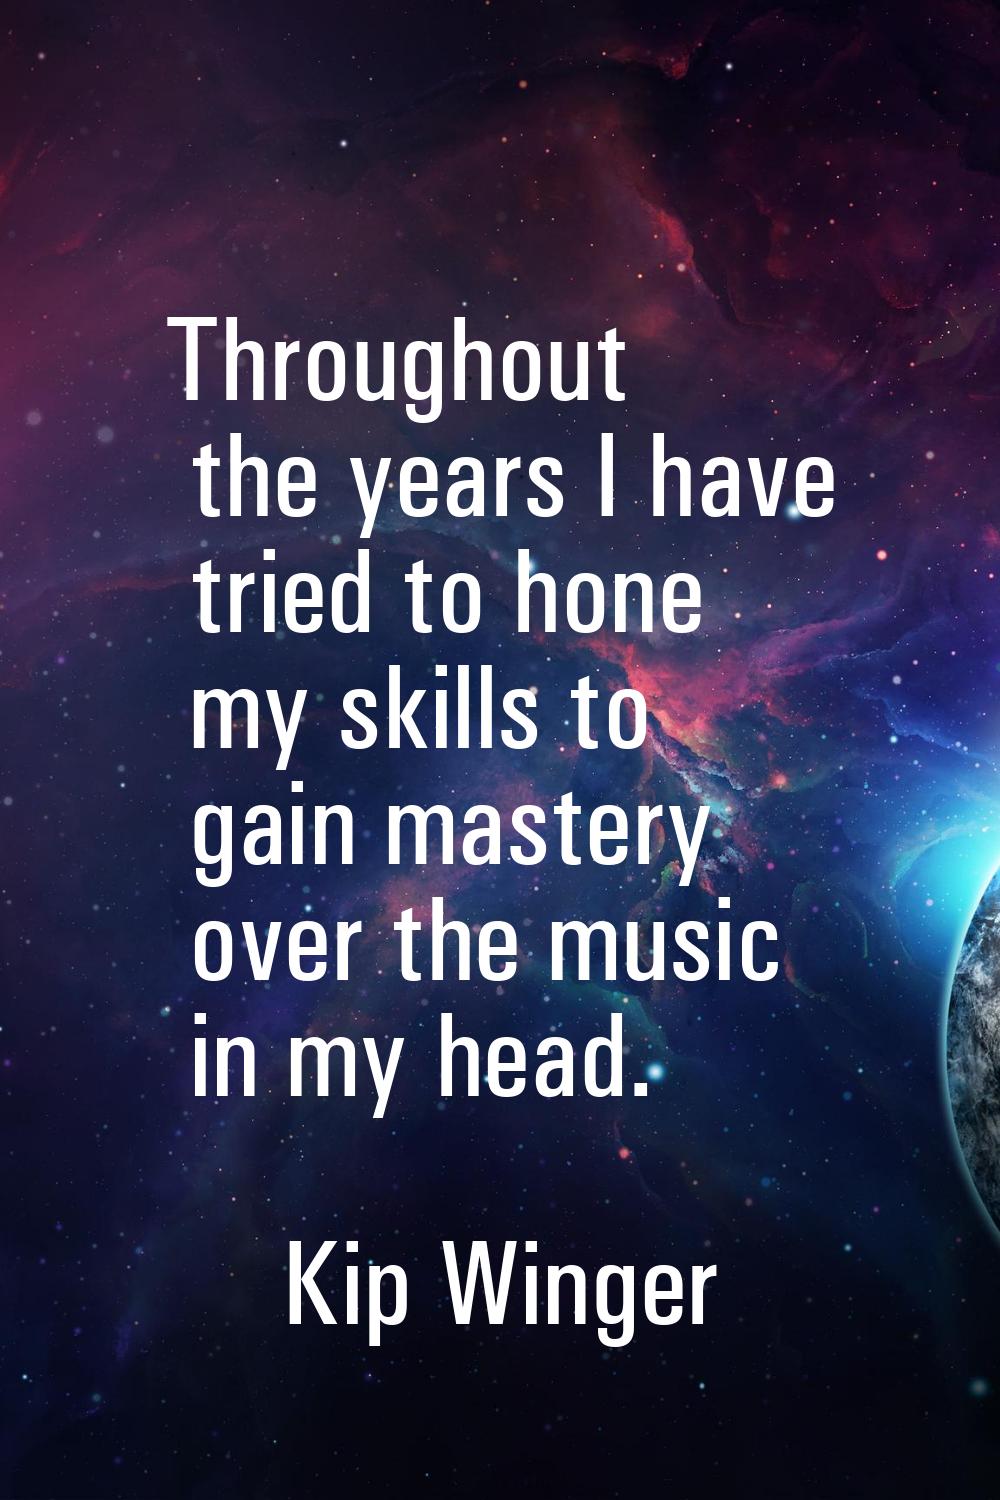 Throughout the years I have tried to hone my skills to gain mastery over the music in my head.